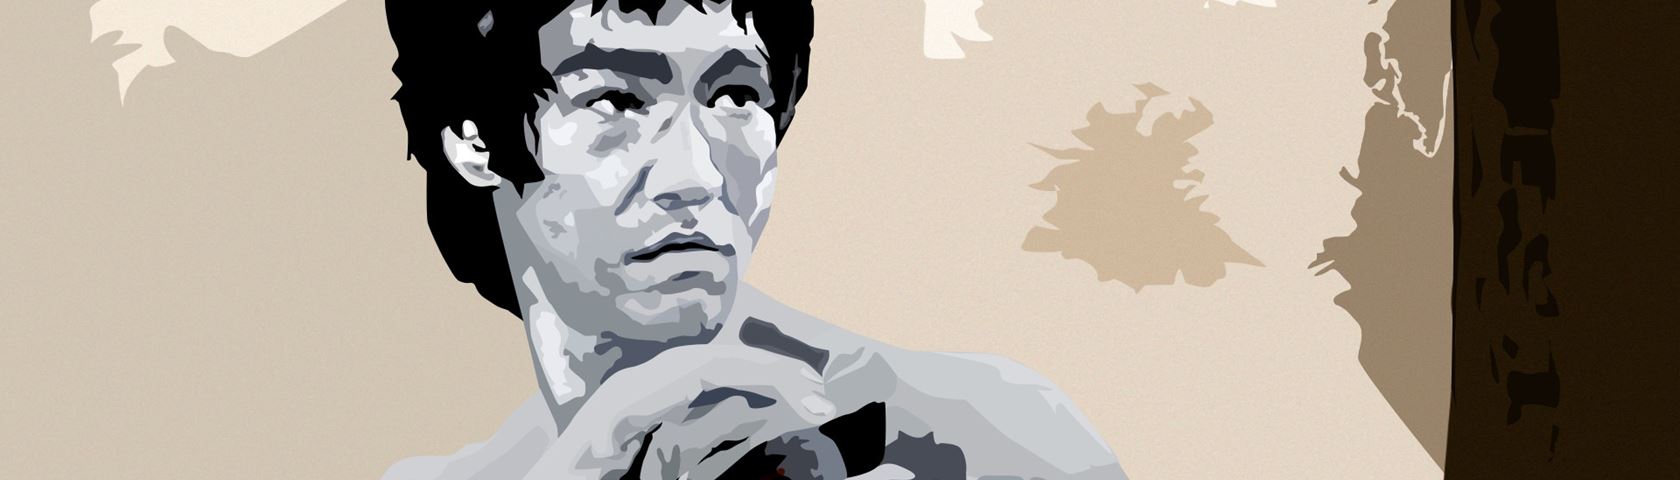 Bruce Lee Wallpaper • Images • WallpaperFusion by Binary Fortress Software